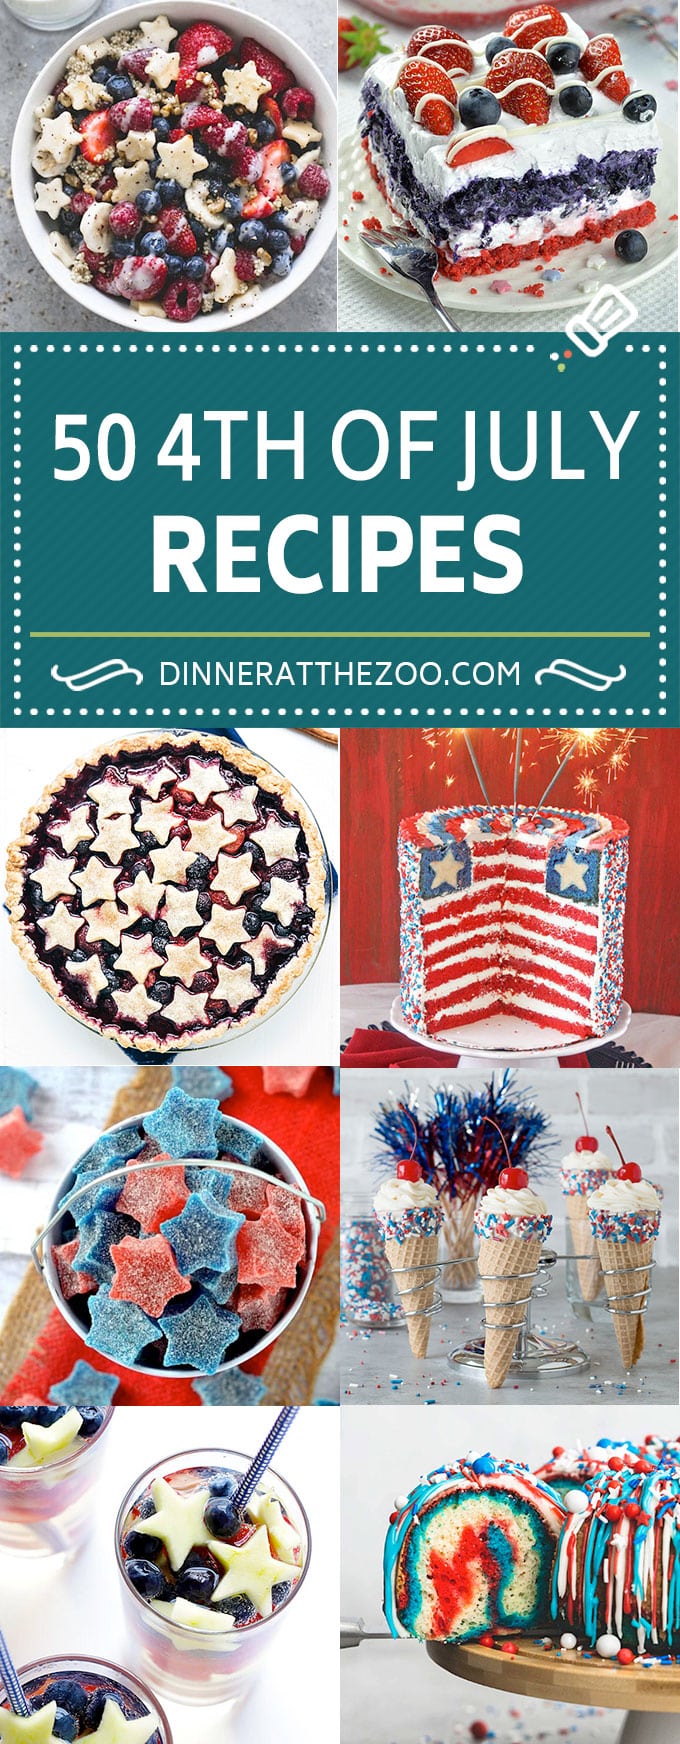 4th of July Recipes | Patriotic Recipes | Red White and Blue Recipes | Memorial Day Recipes #4thofjuly #patriotic #dinneratthezoo